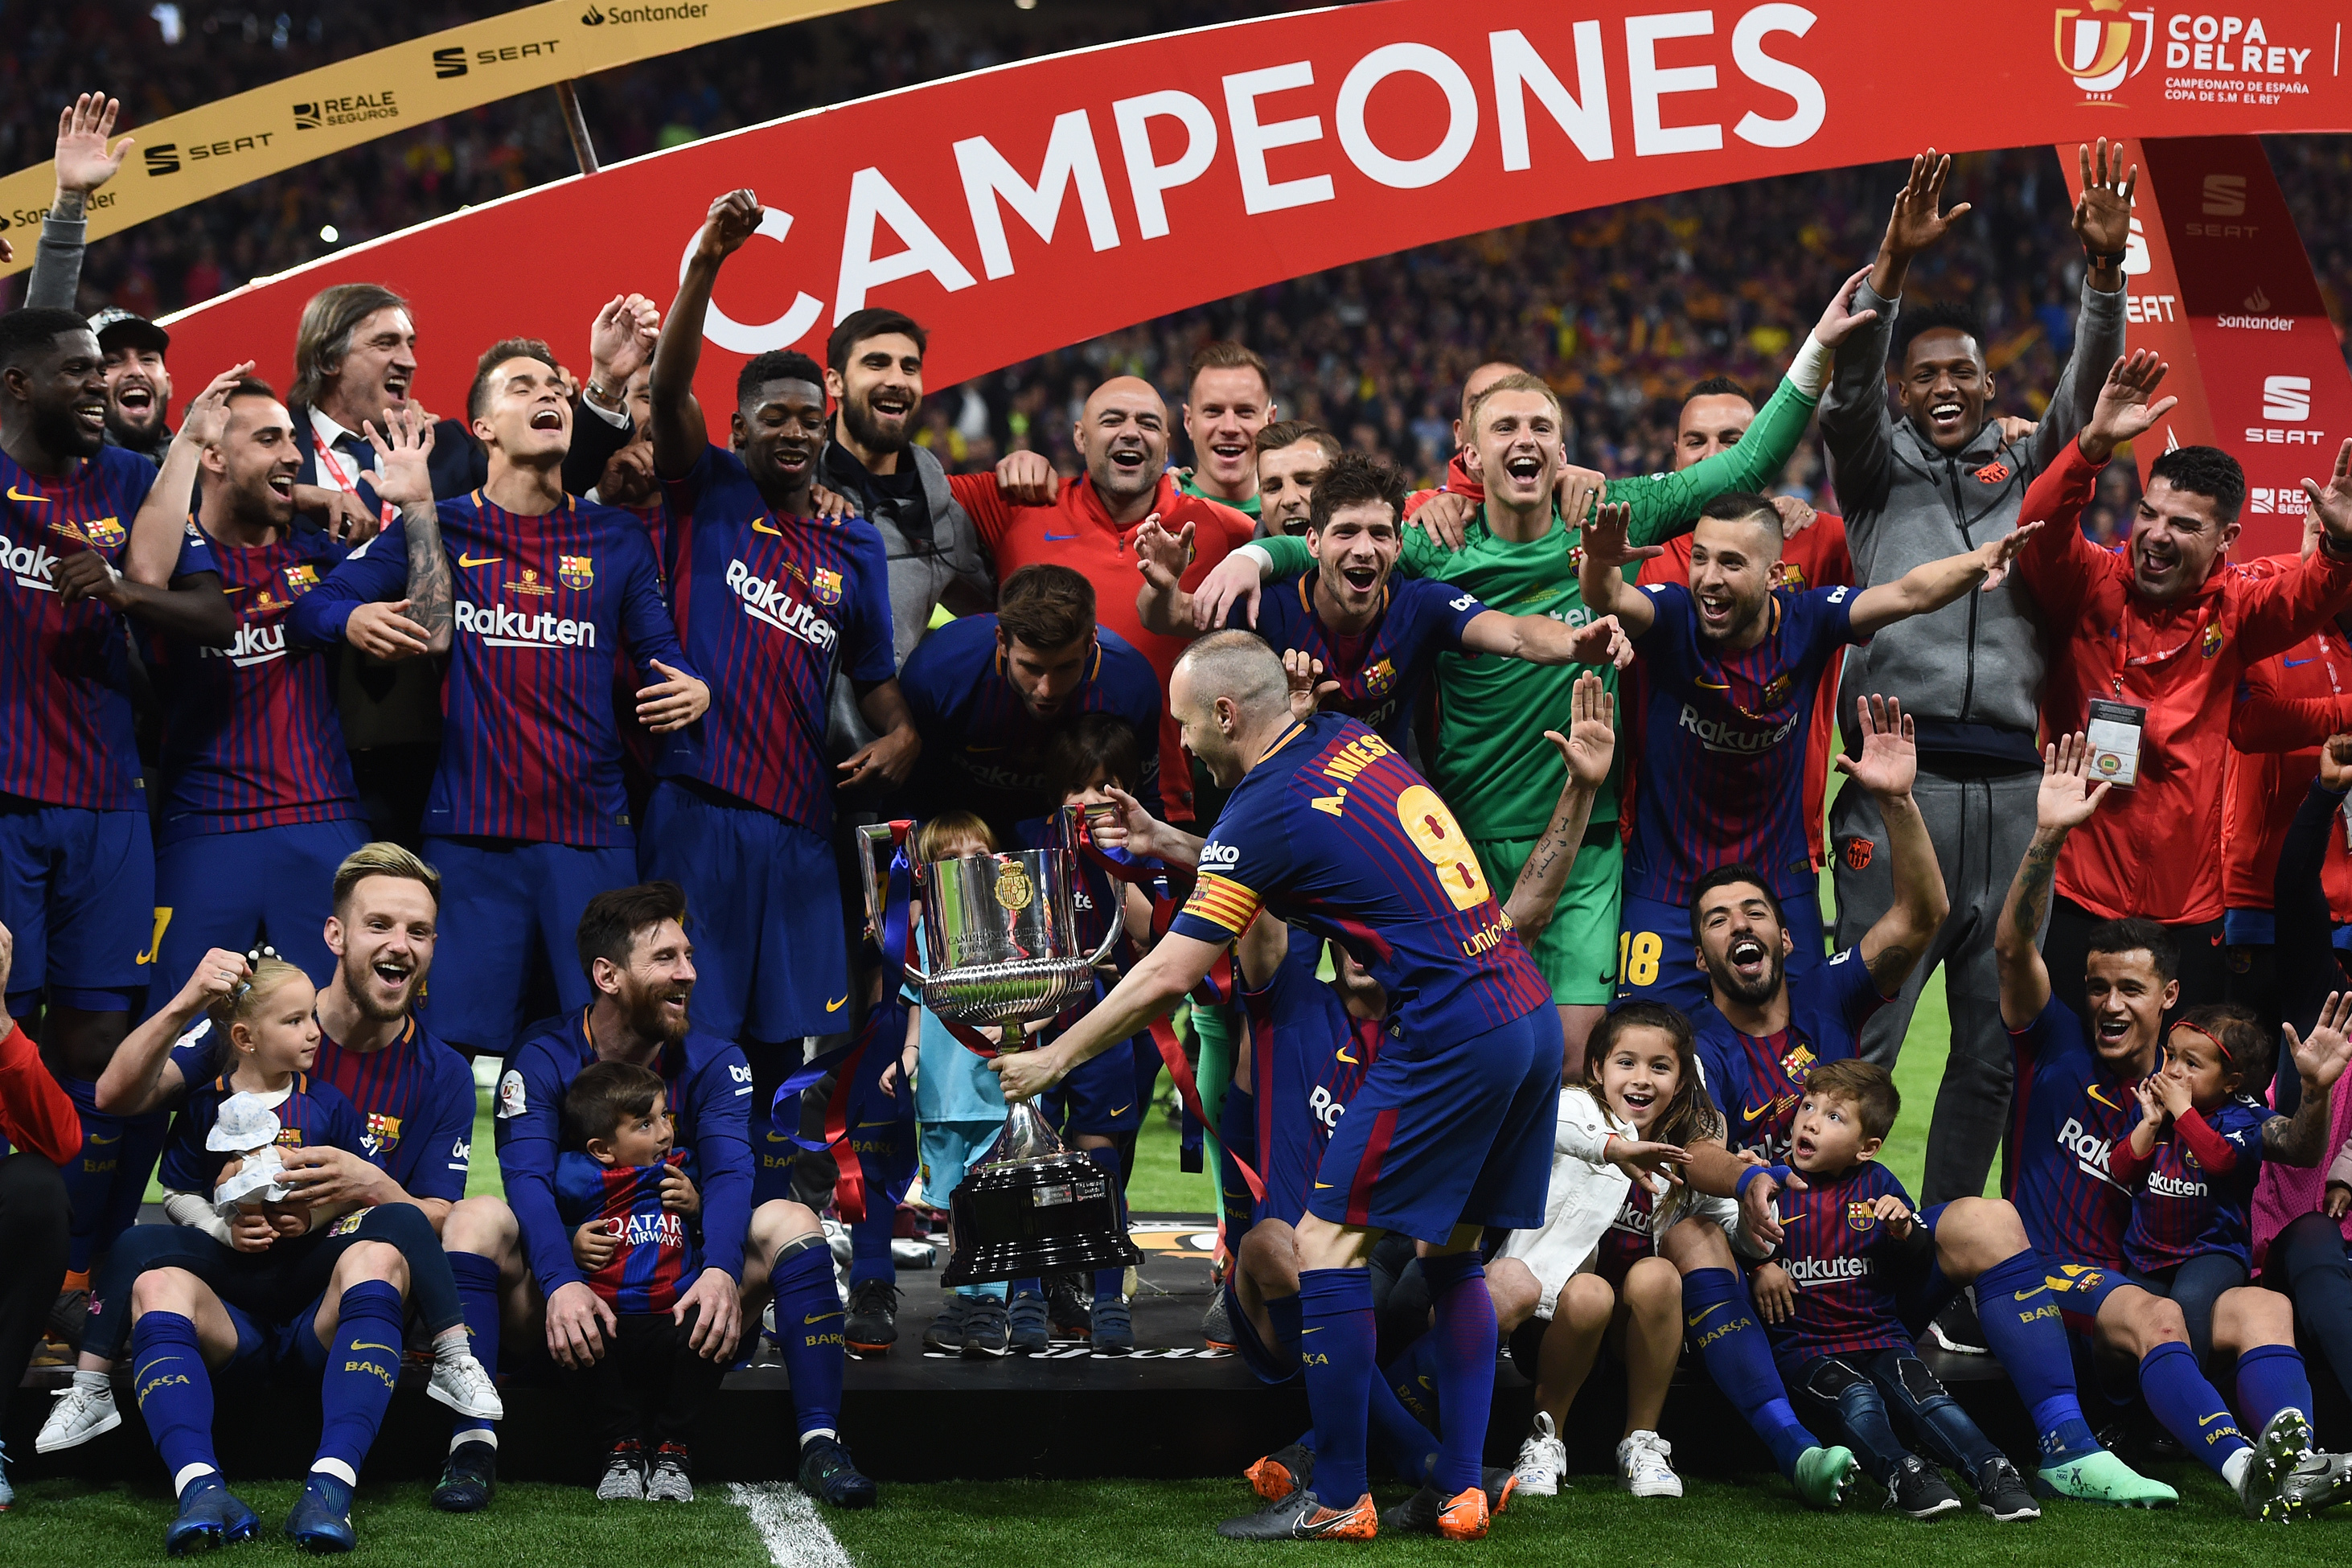 Copa Del Rey Draw 2018 19 Schedule Of Dates For Round Of 32 Fixtures Bleacher Report Latest News Videos And Highlights